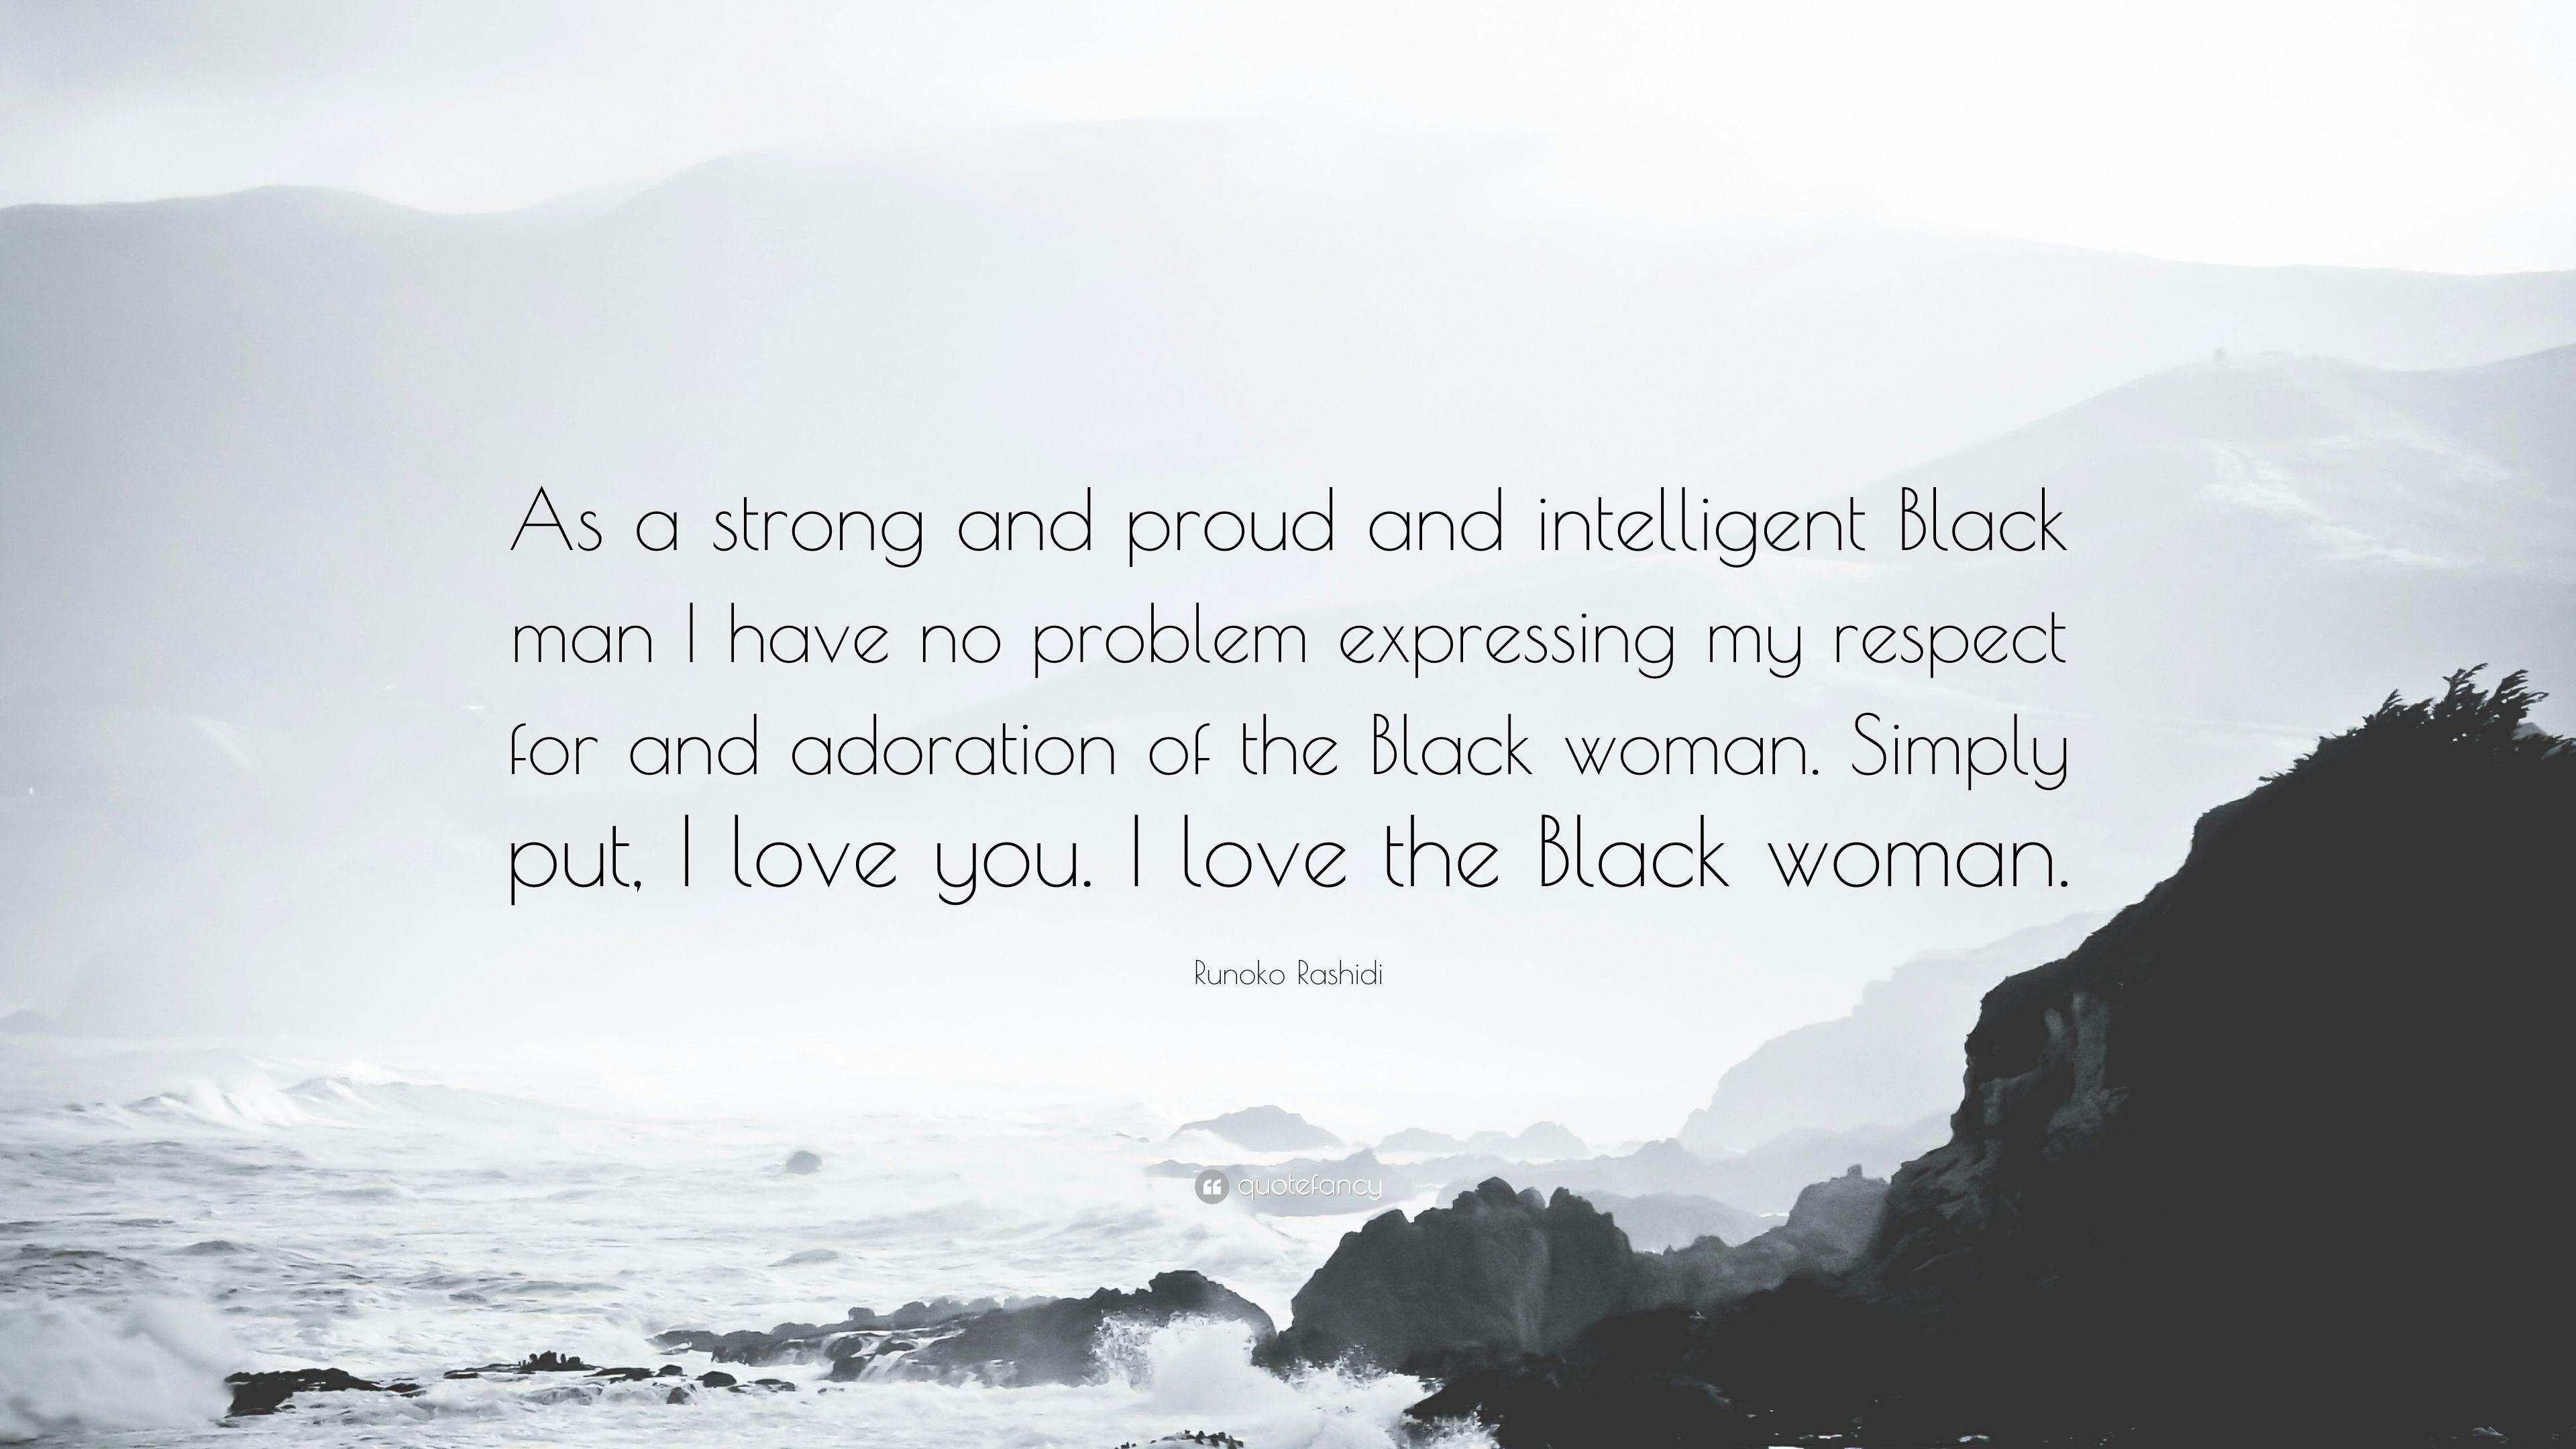 Runoko Rashidi Quote: “As a strong and proud and intelligent Black